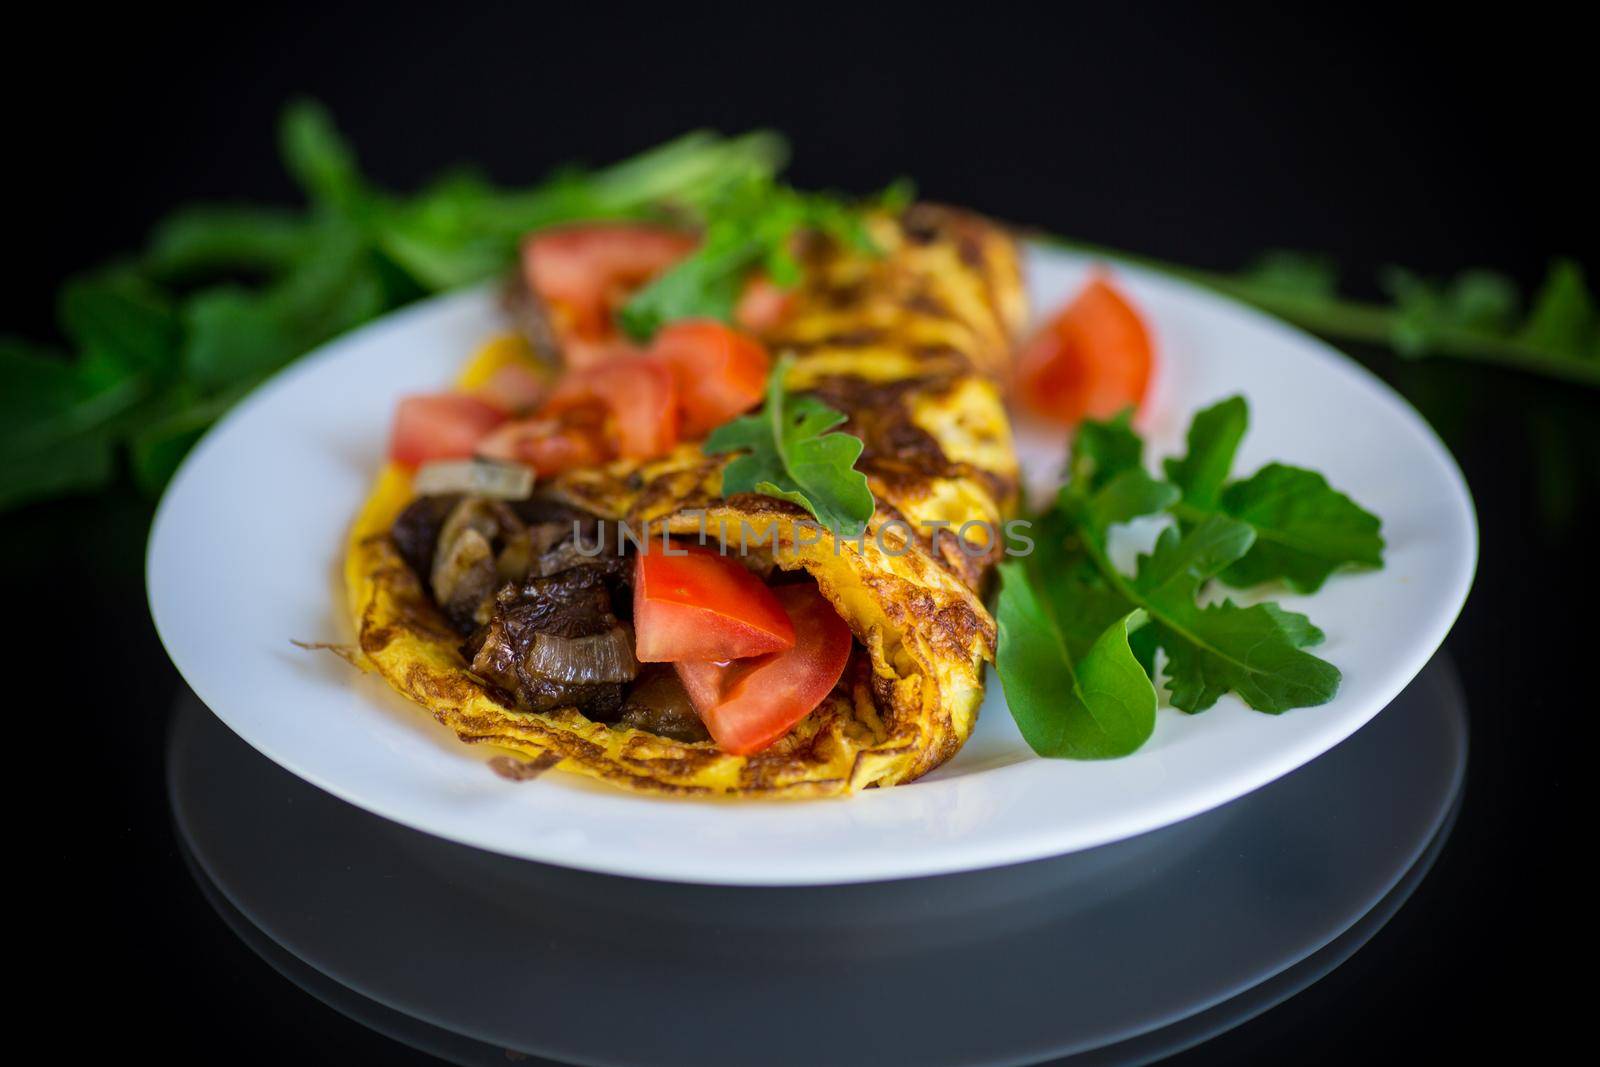 fried egg omelet with wild mushrooms and tomatoes, on black background